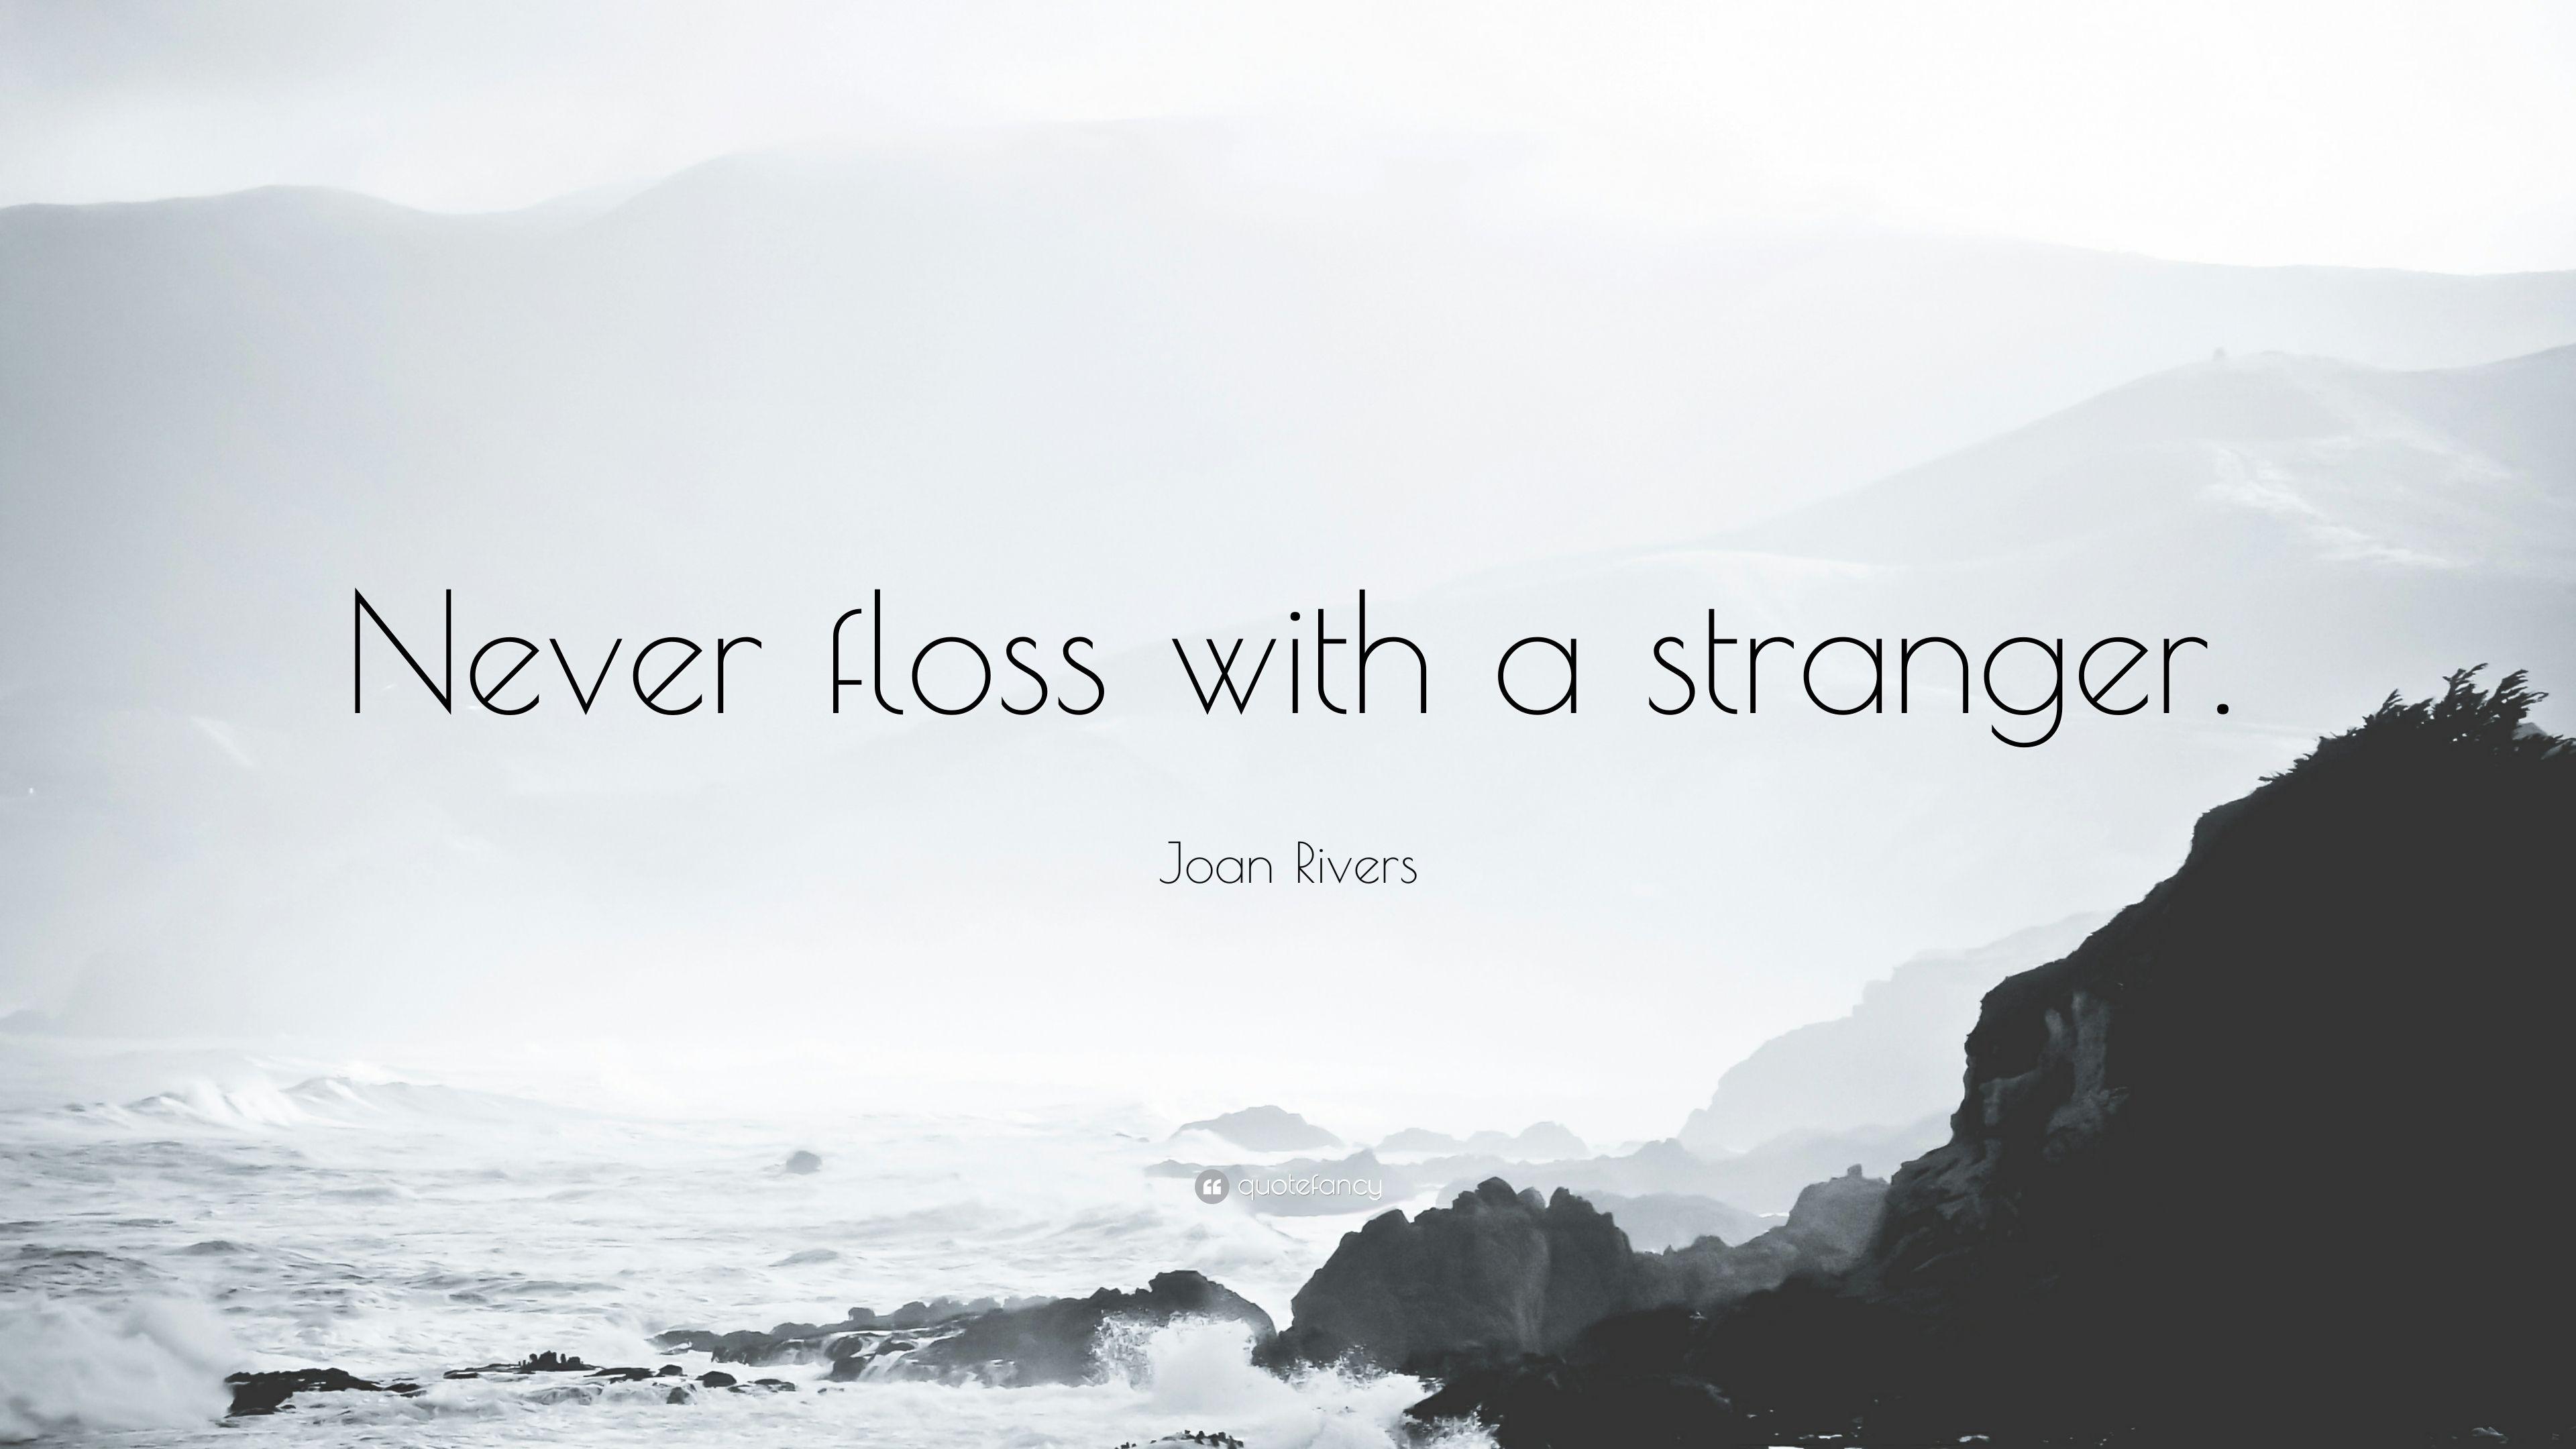 Joan Rivers Quote: “Never floss with a stranger.” 7 wallpaper